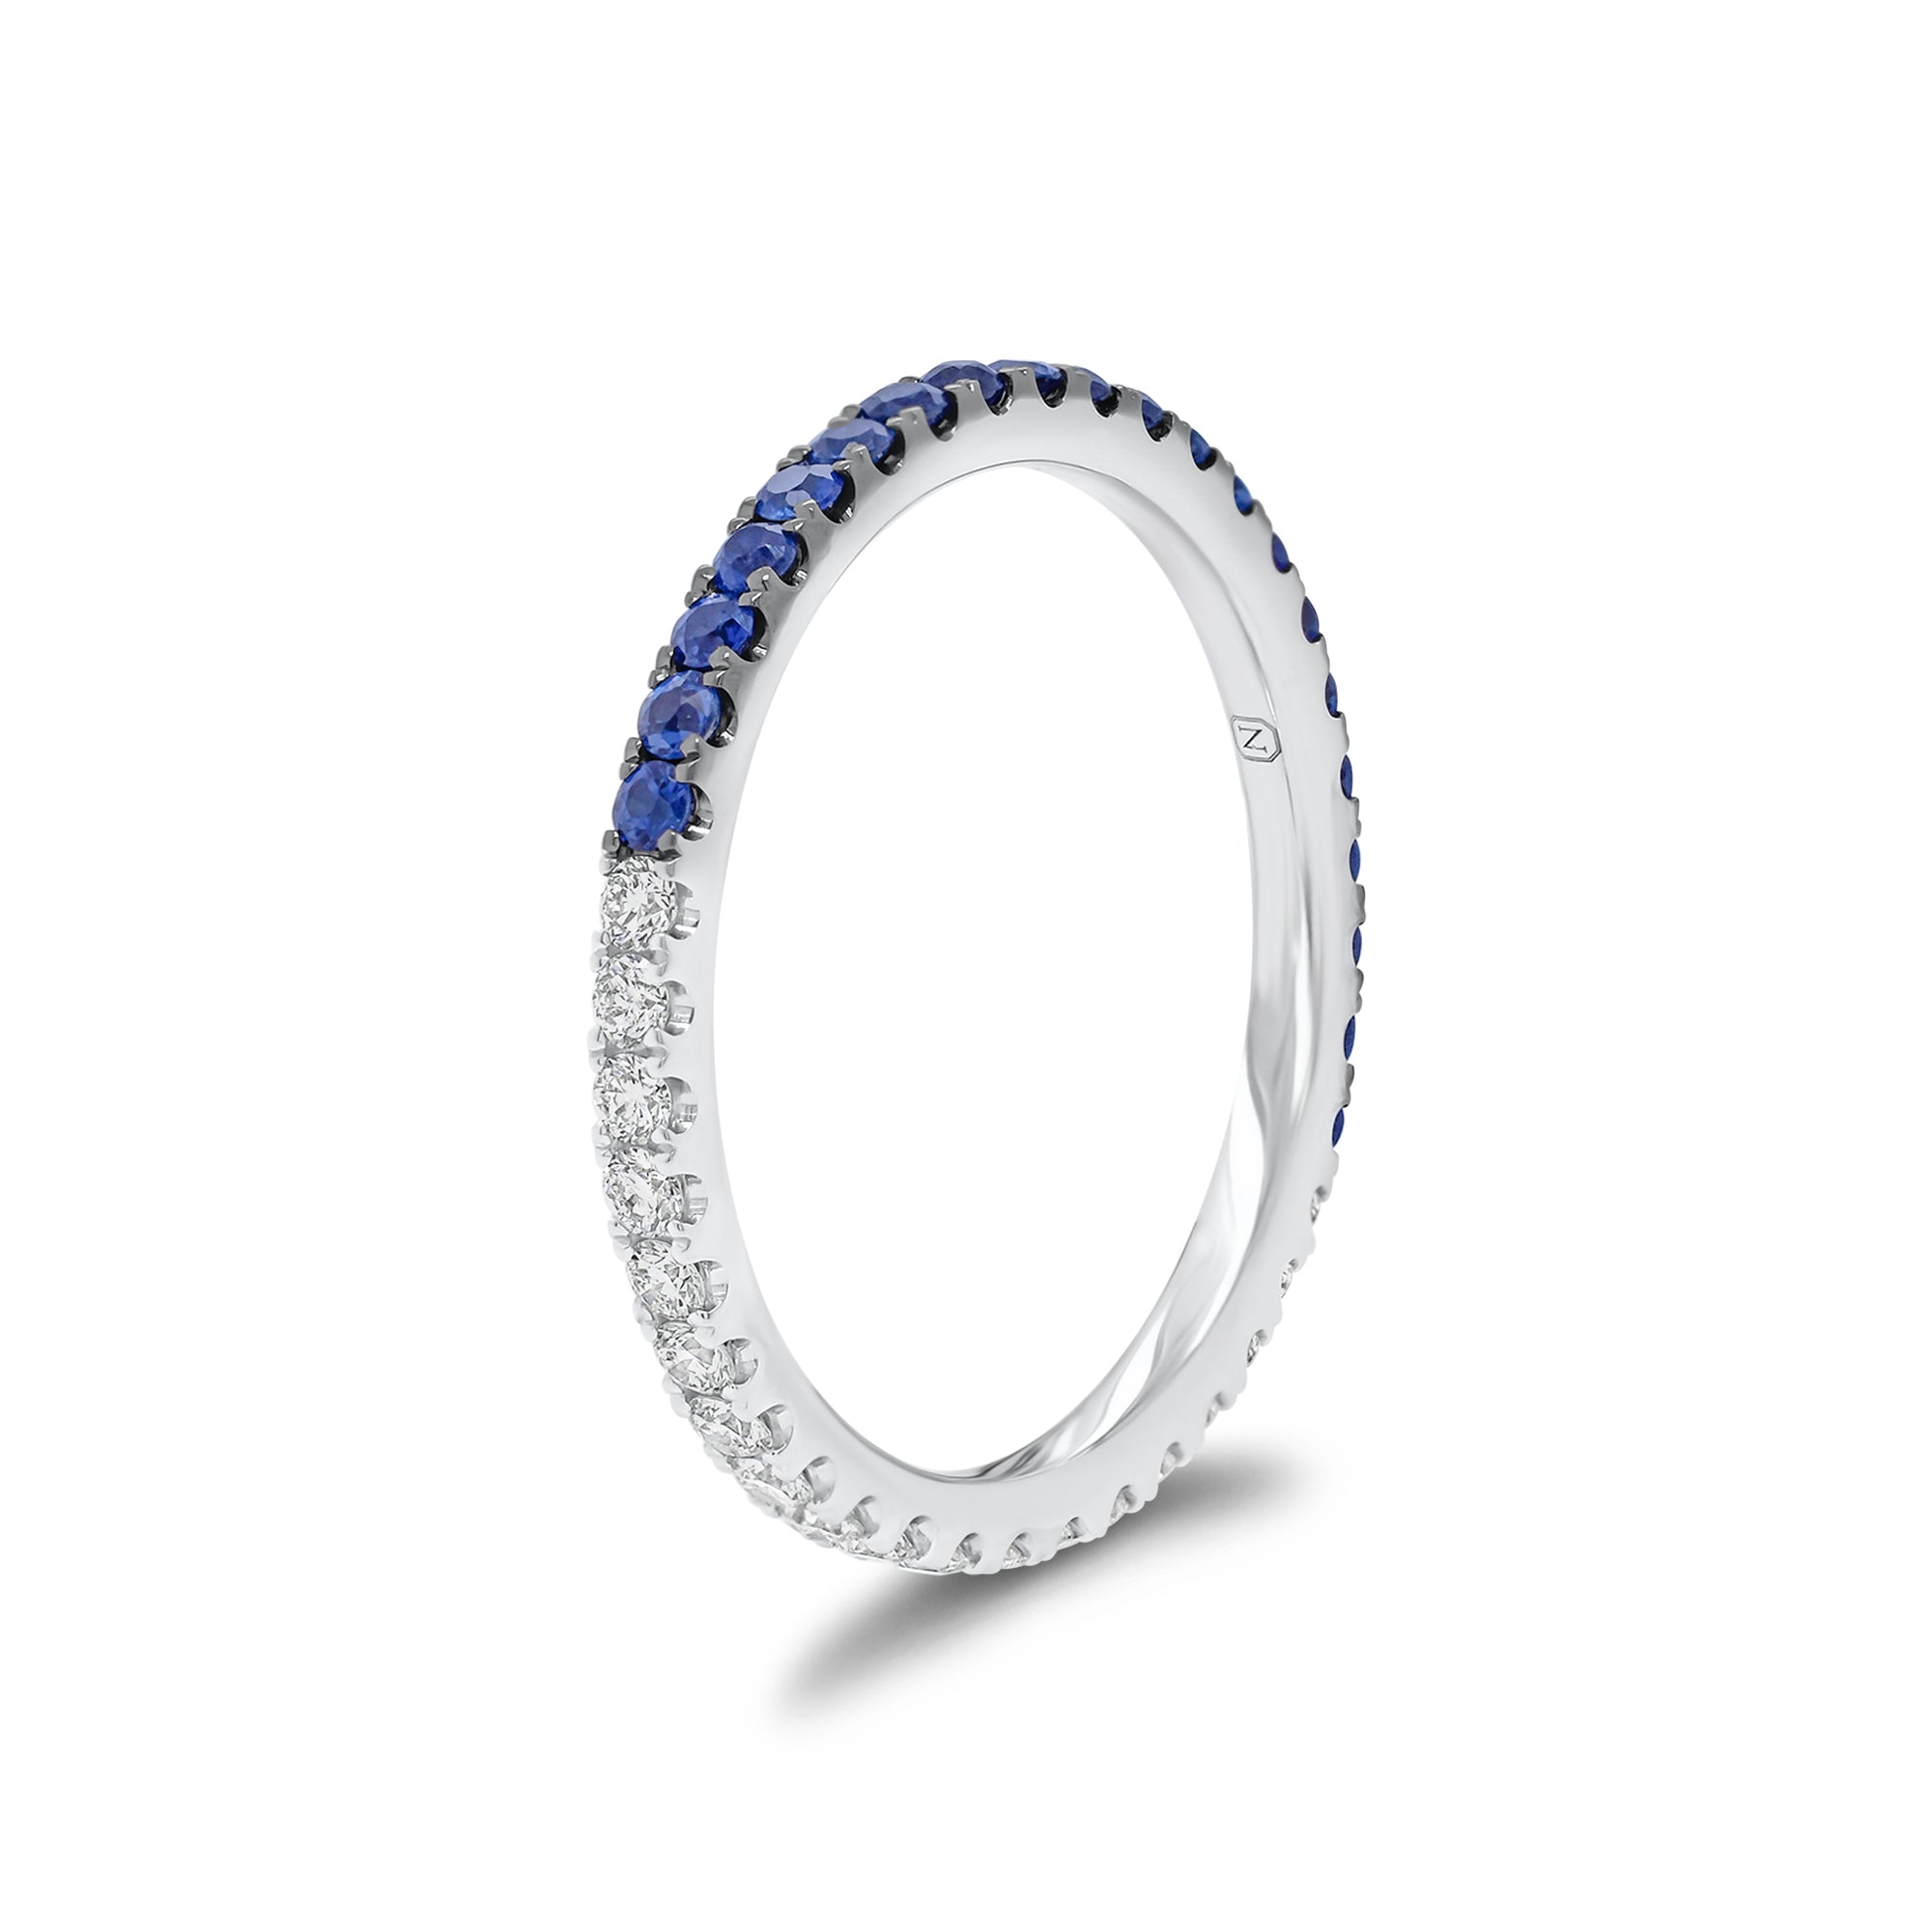 Diamond and Sapphire "Two-Tone" Stacking Ring - 14K gold weighing 1.27 grams  - 20 round diamonds weighing 0.26 carats  - 20 sapphires weighing 0.34 carats